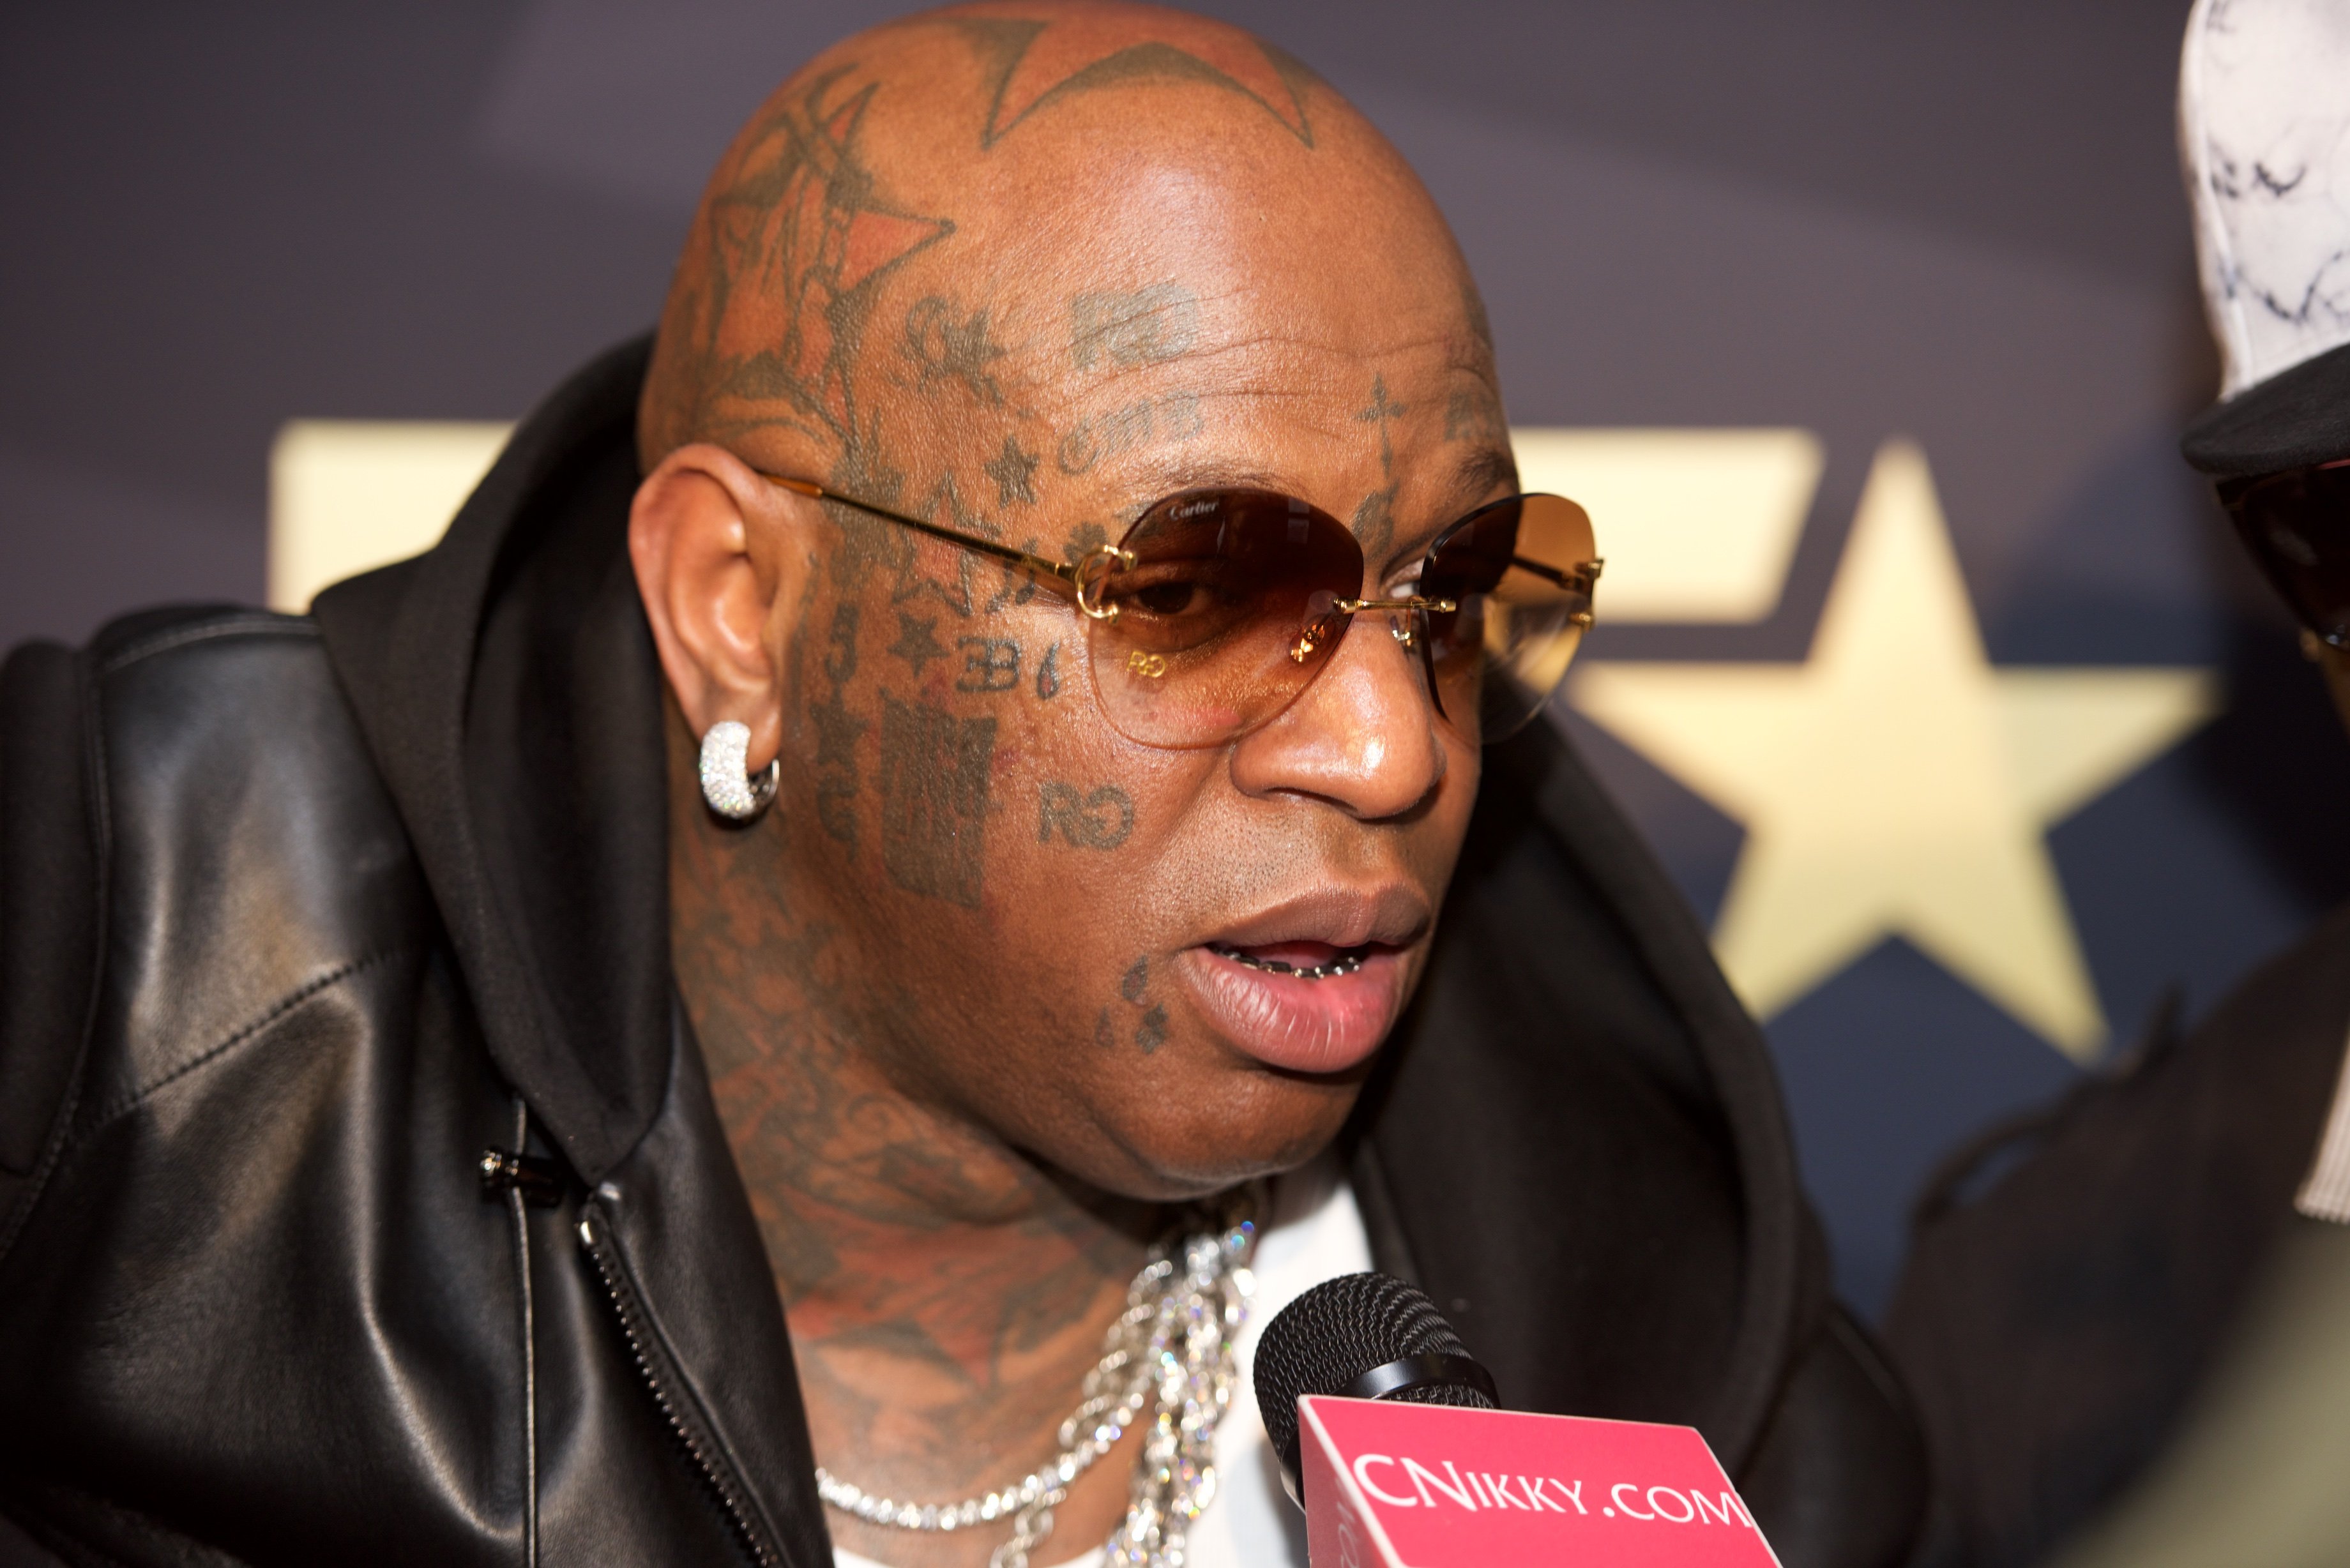 Birdman attends BET "Music Moguls" Premiere Event on June 27, 2016 in California | Photo: Getty Images